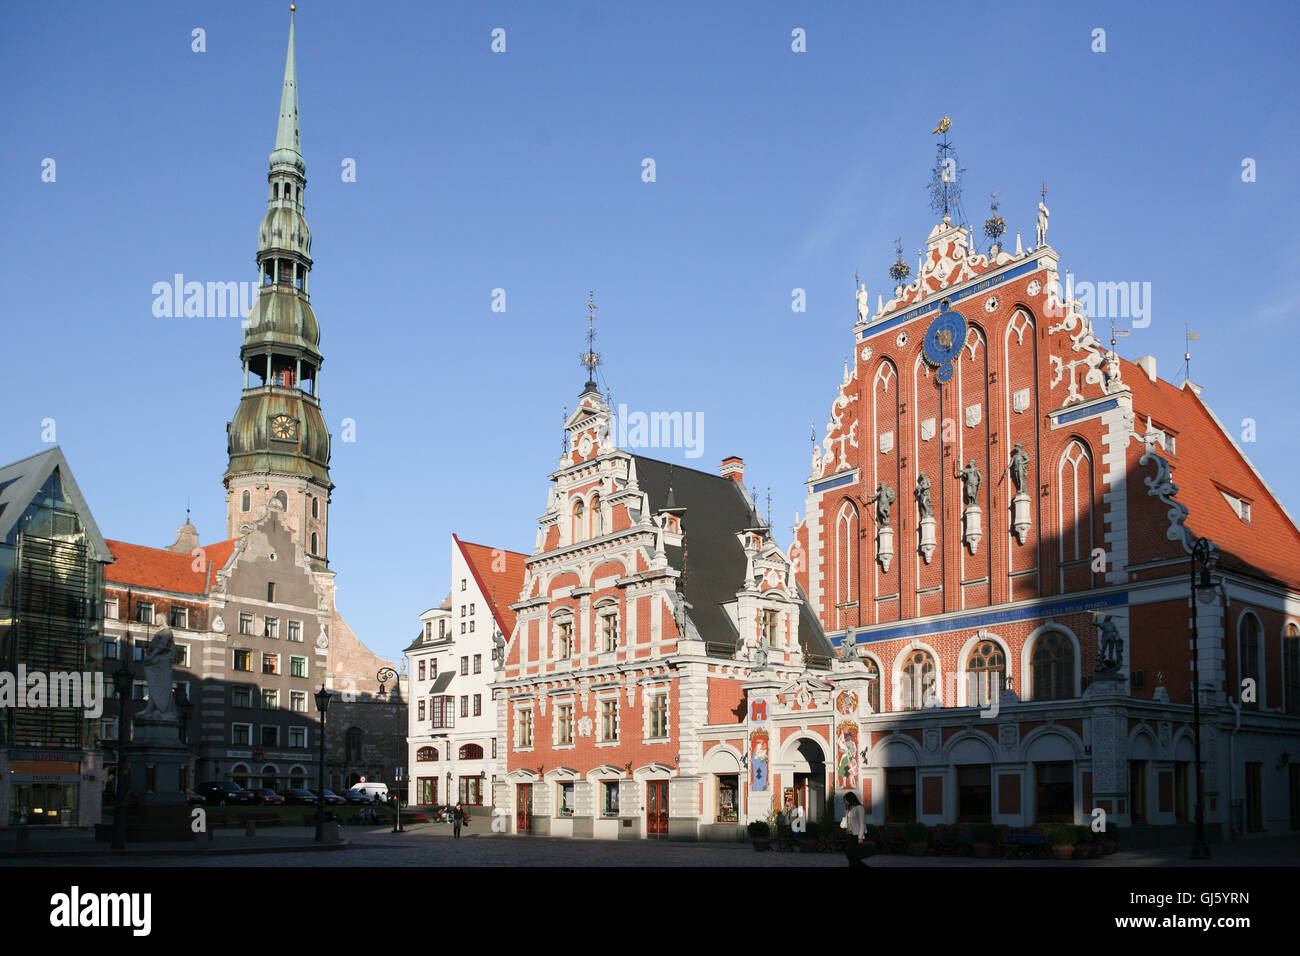 The famous Hanseatic House of Blackheads, originally built in 1344, and rebuilt in 1999 after being destroyed in WWII, in the Old Town, in the centre of Riga, the capital of Latvia. Spire of St Peter's Church on left. May. Stock Photo